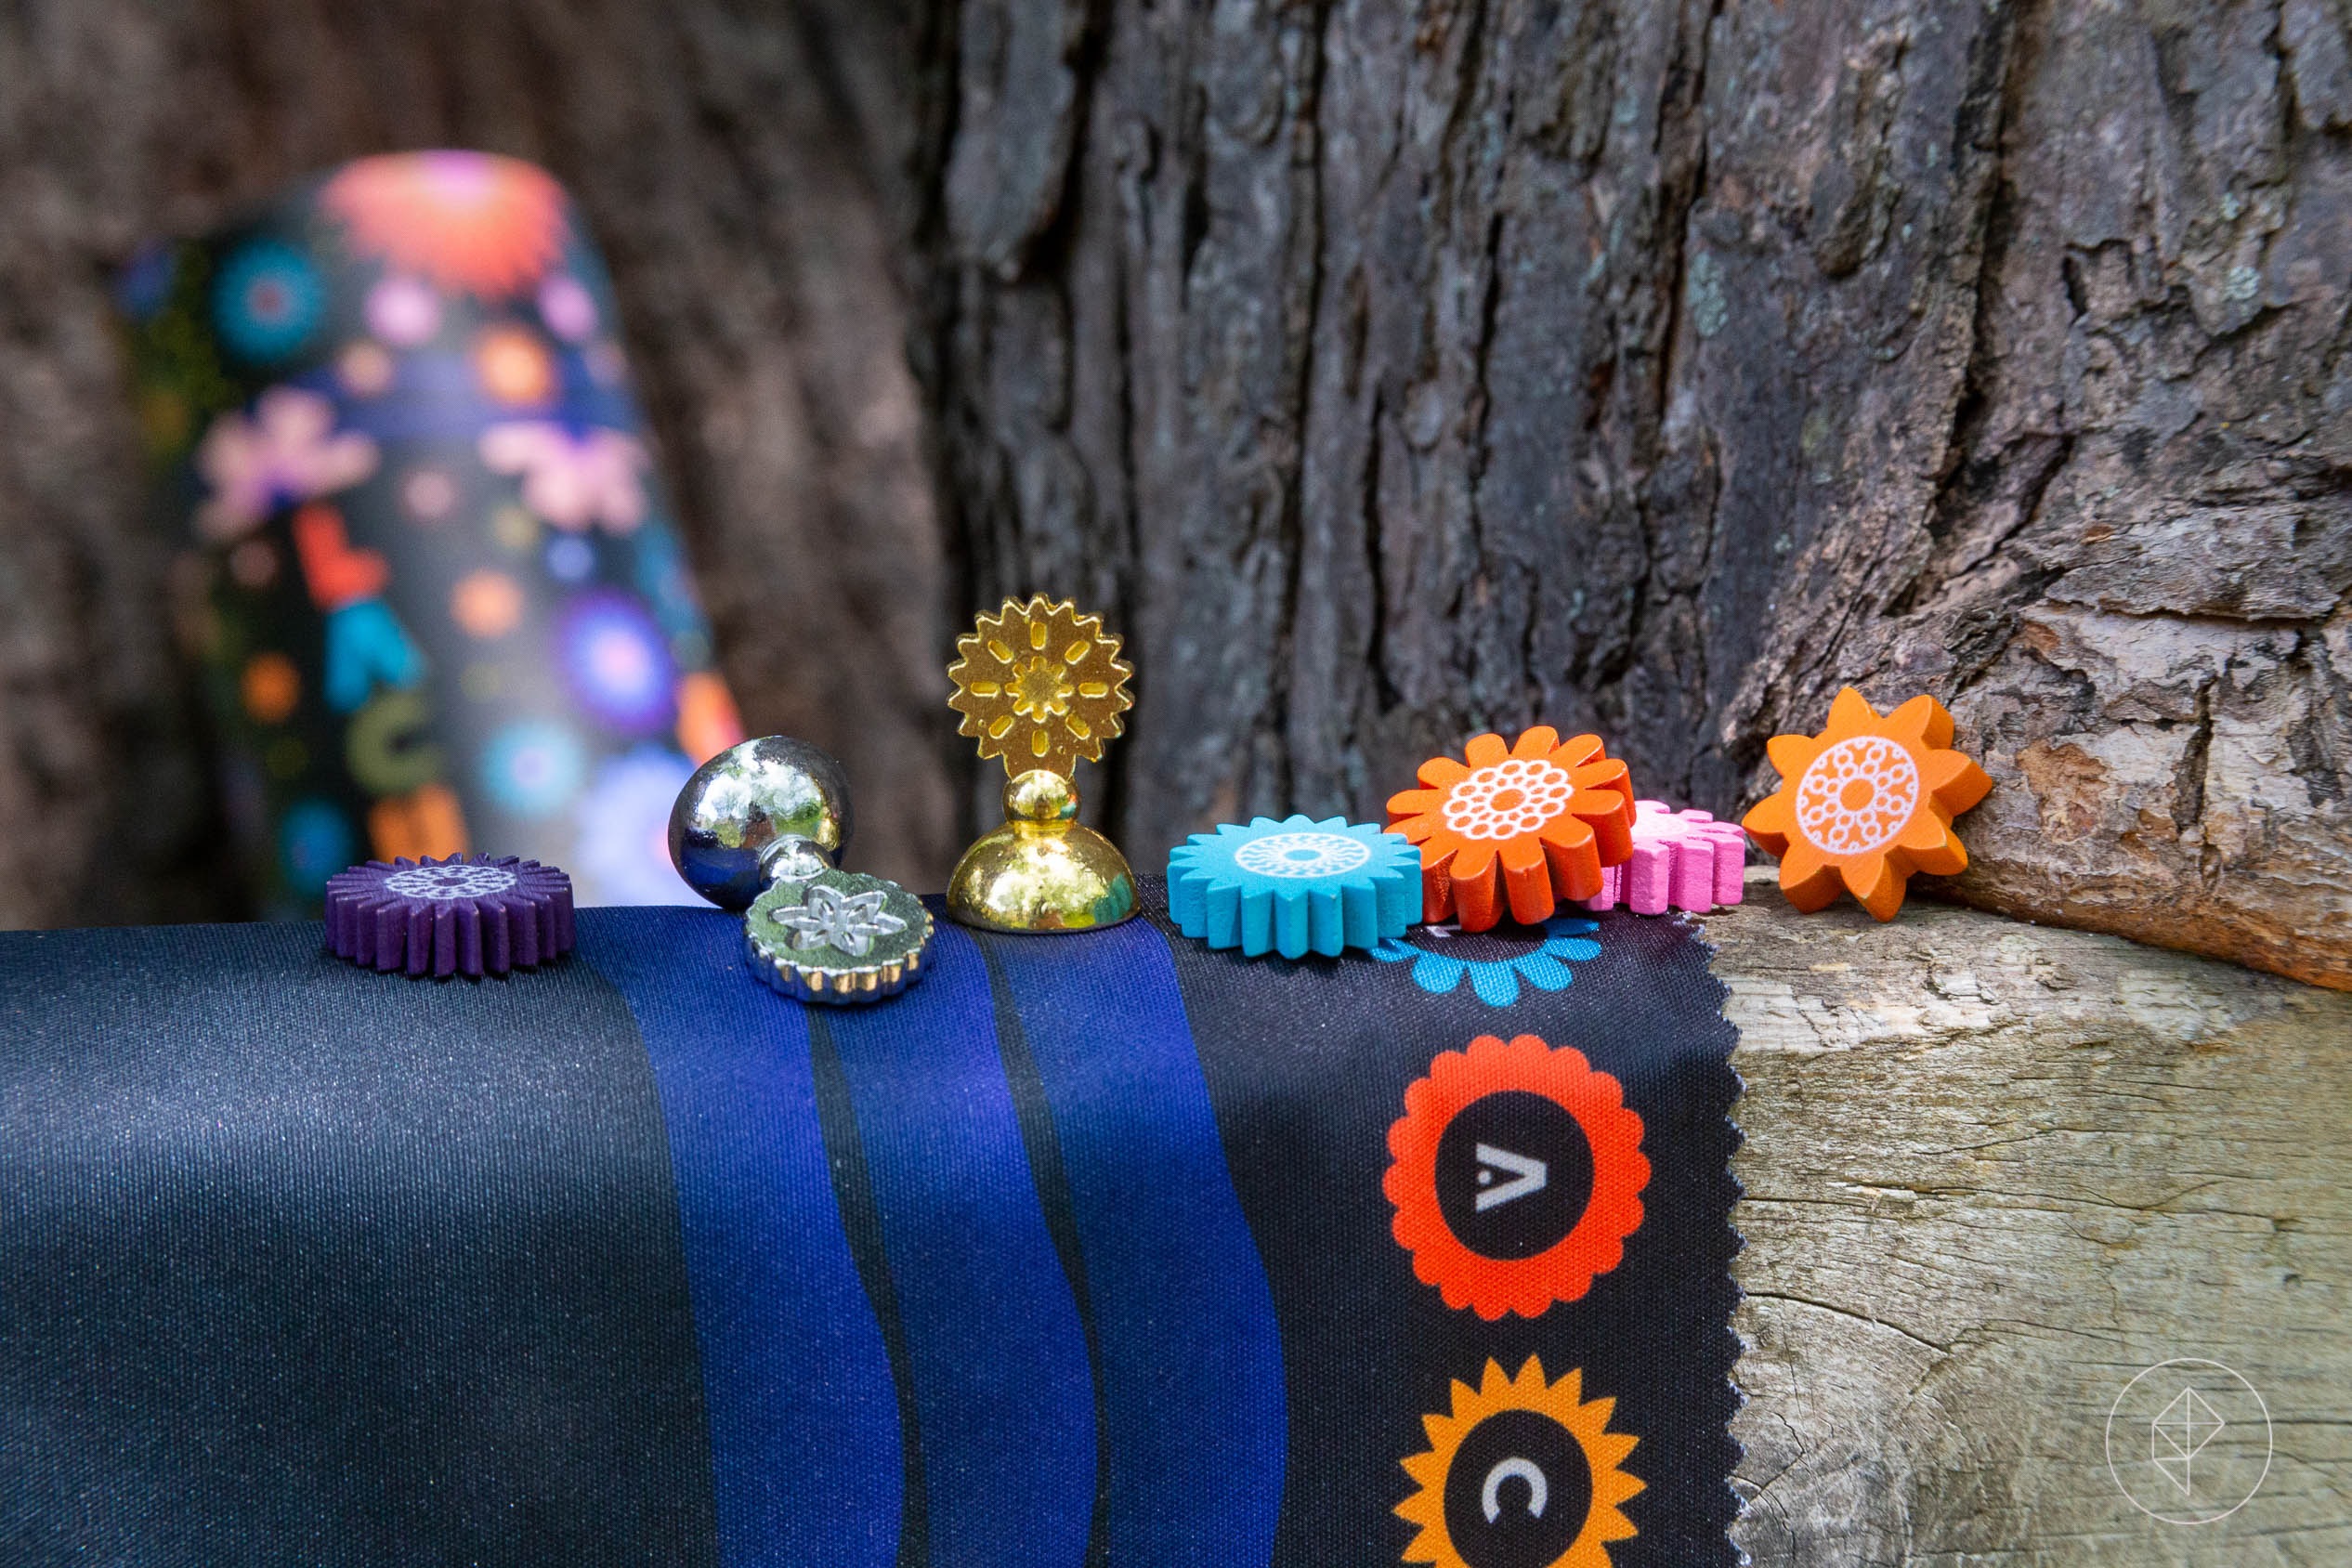 Bits from Lacuna strong across an old treehouse step, the silver maple growing around its edges. The flowers are purple, blue, pink, and orange. The player pawns are gold and silver circles on a small plinth. The tube that is the box for the game is in the background.